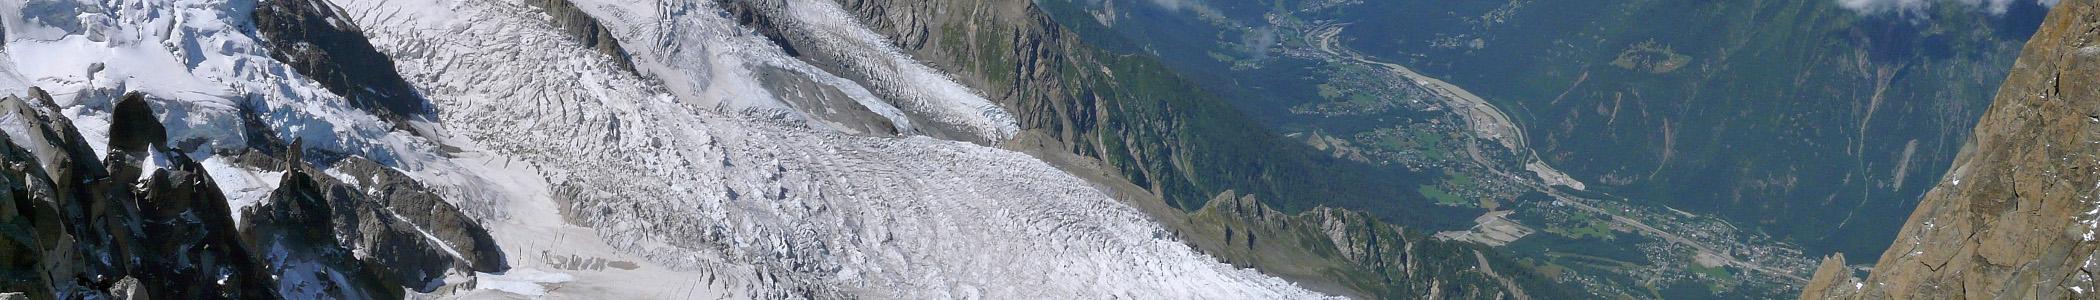 Banner image for Chamonix-Mont-Blanc on GigsGuide